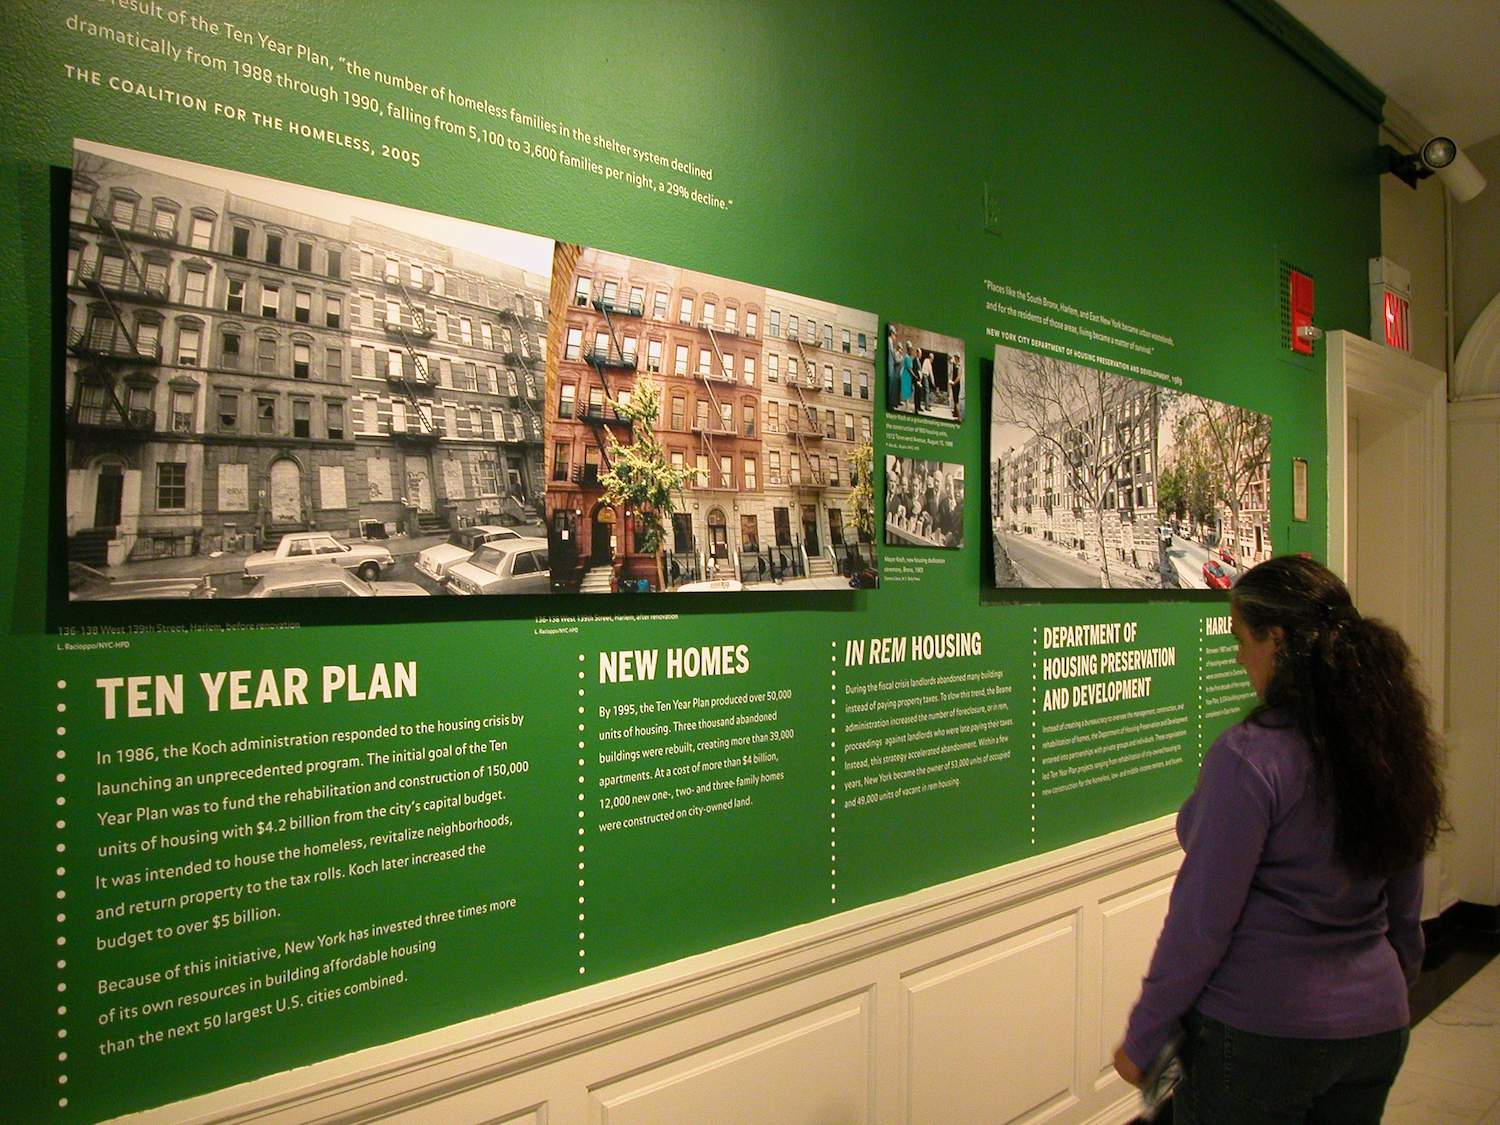   NEW YORK COMES BACK: MAYOR ED KOCH    AND THE CITY , 2005 